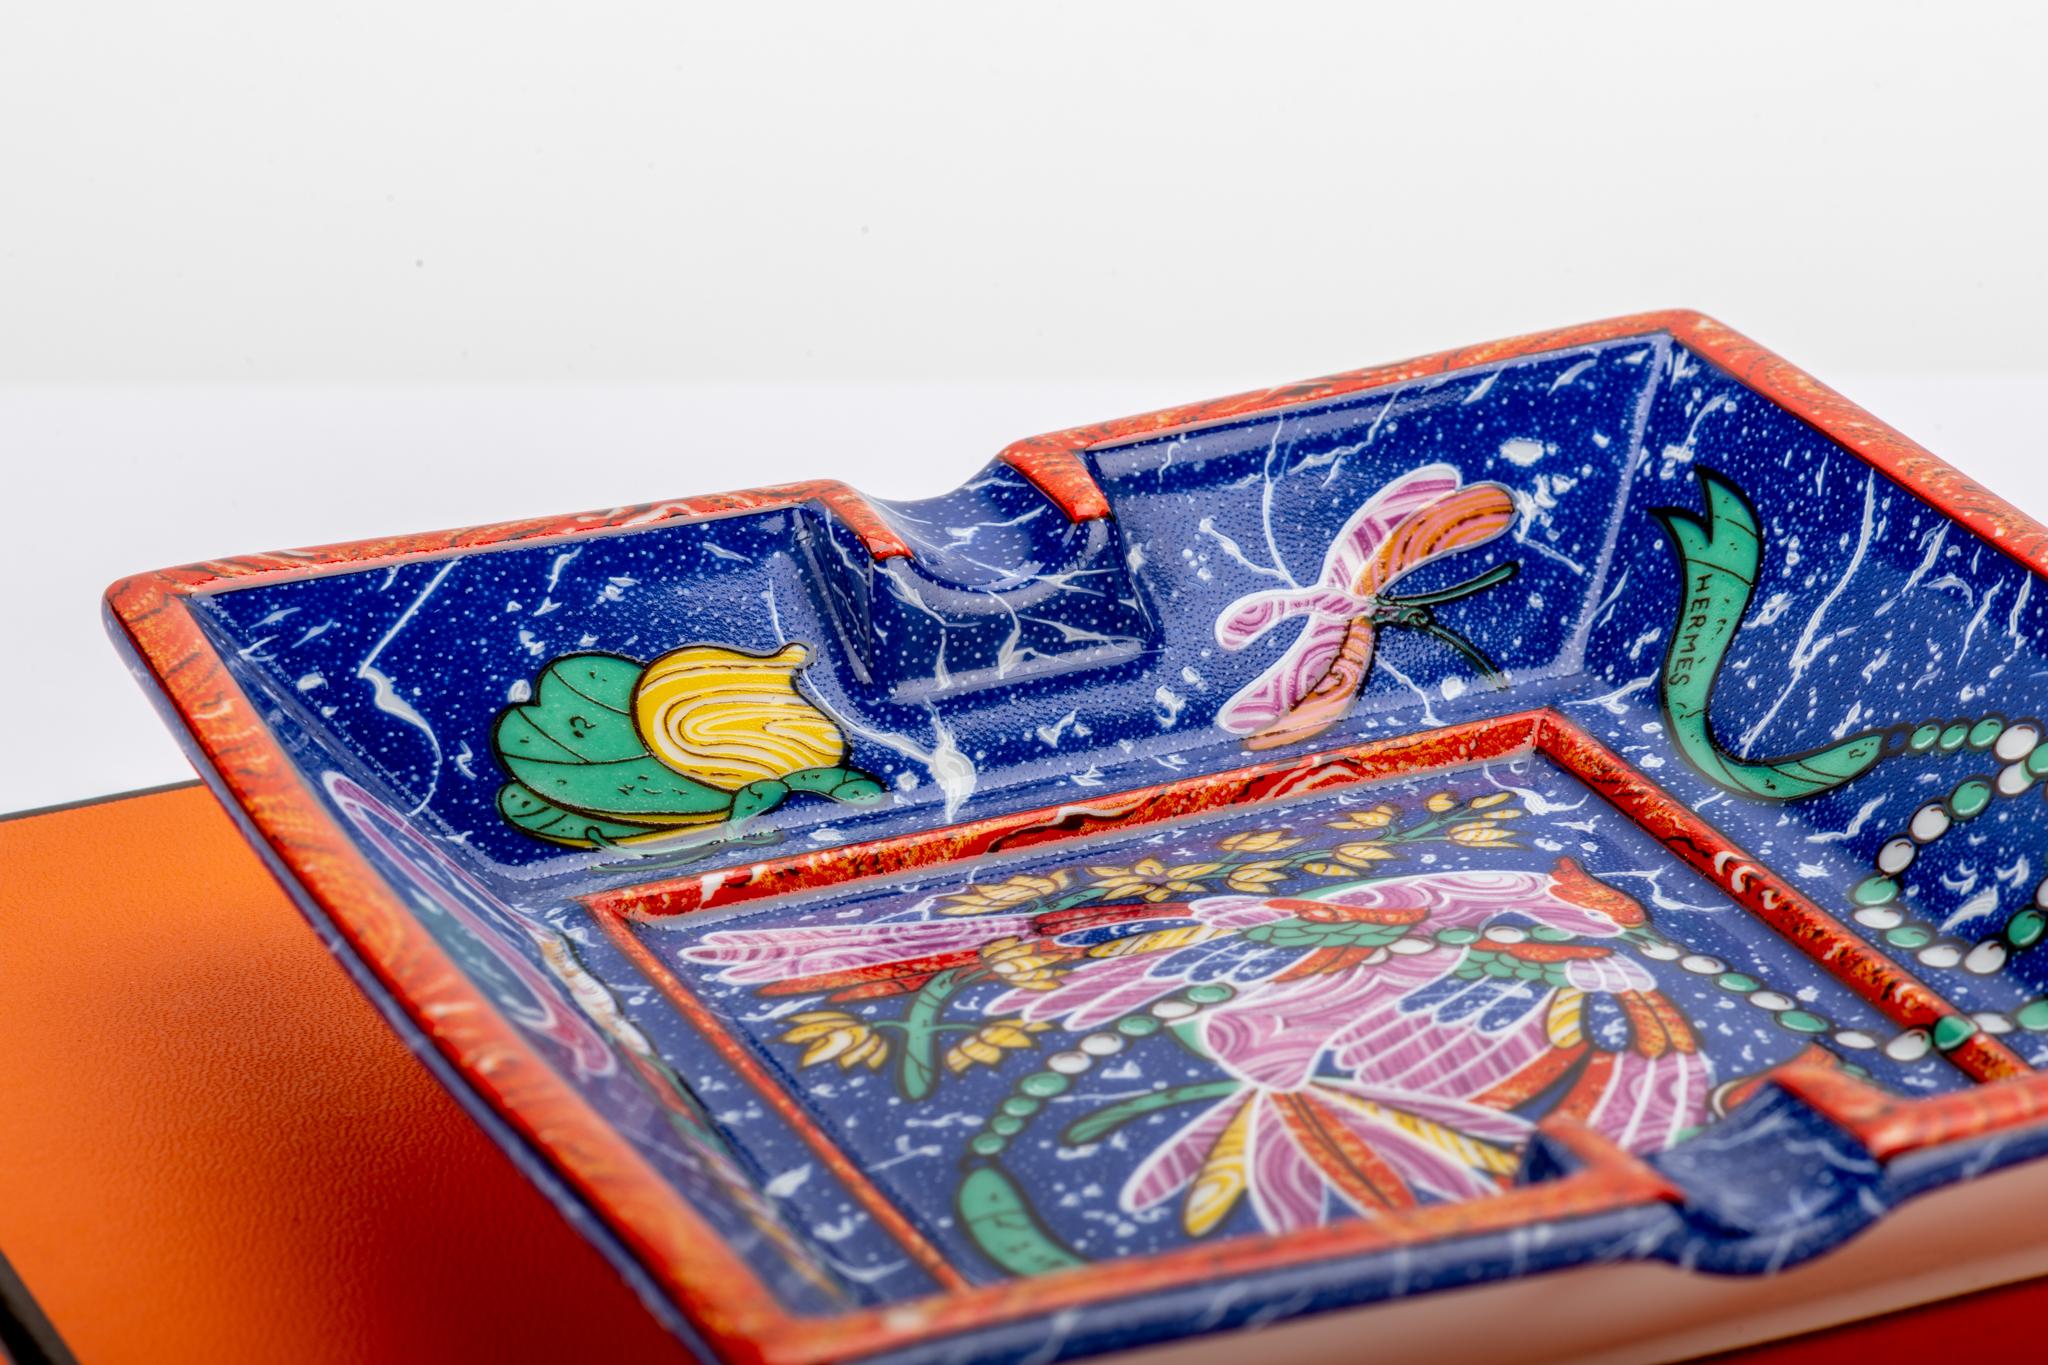 French Hermès square porcelain ashtray with stylized peacock design. Comes with original box.